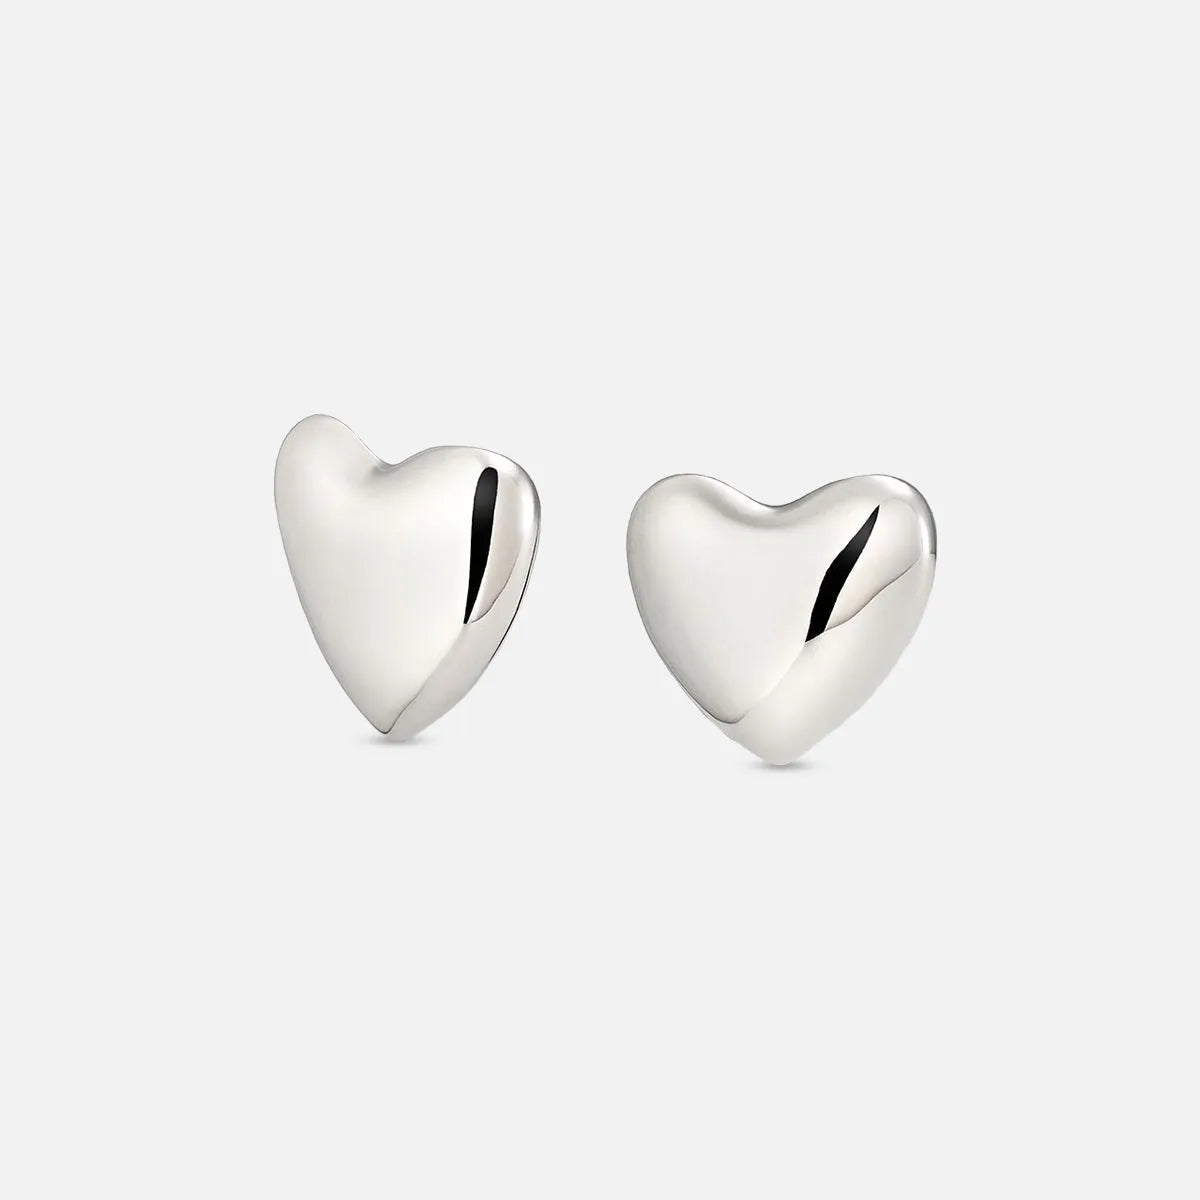 Voluptuous Heart Earrings, Large - At Present